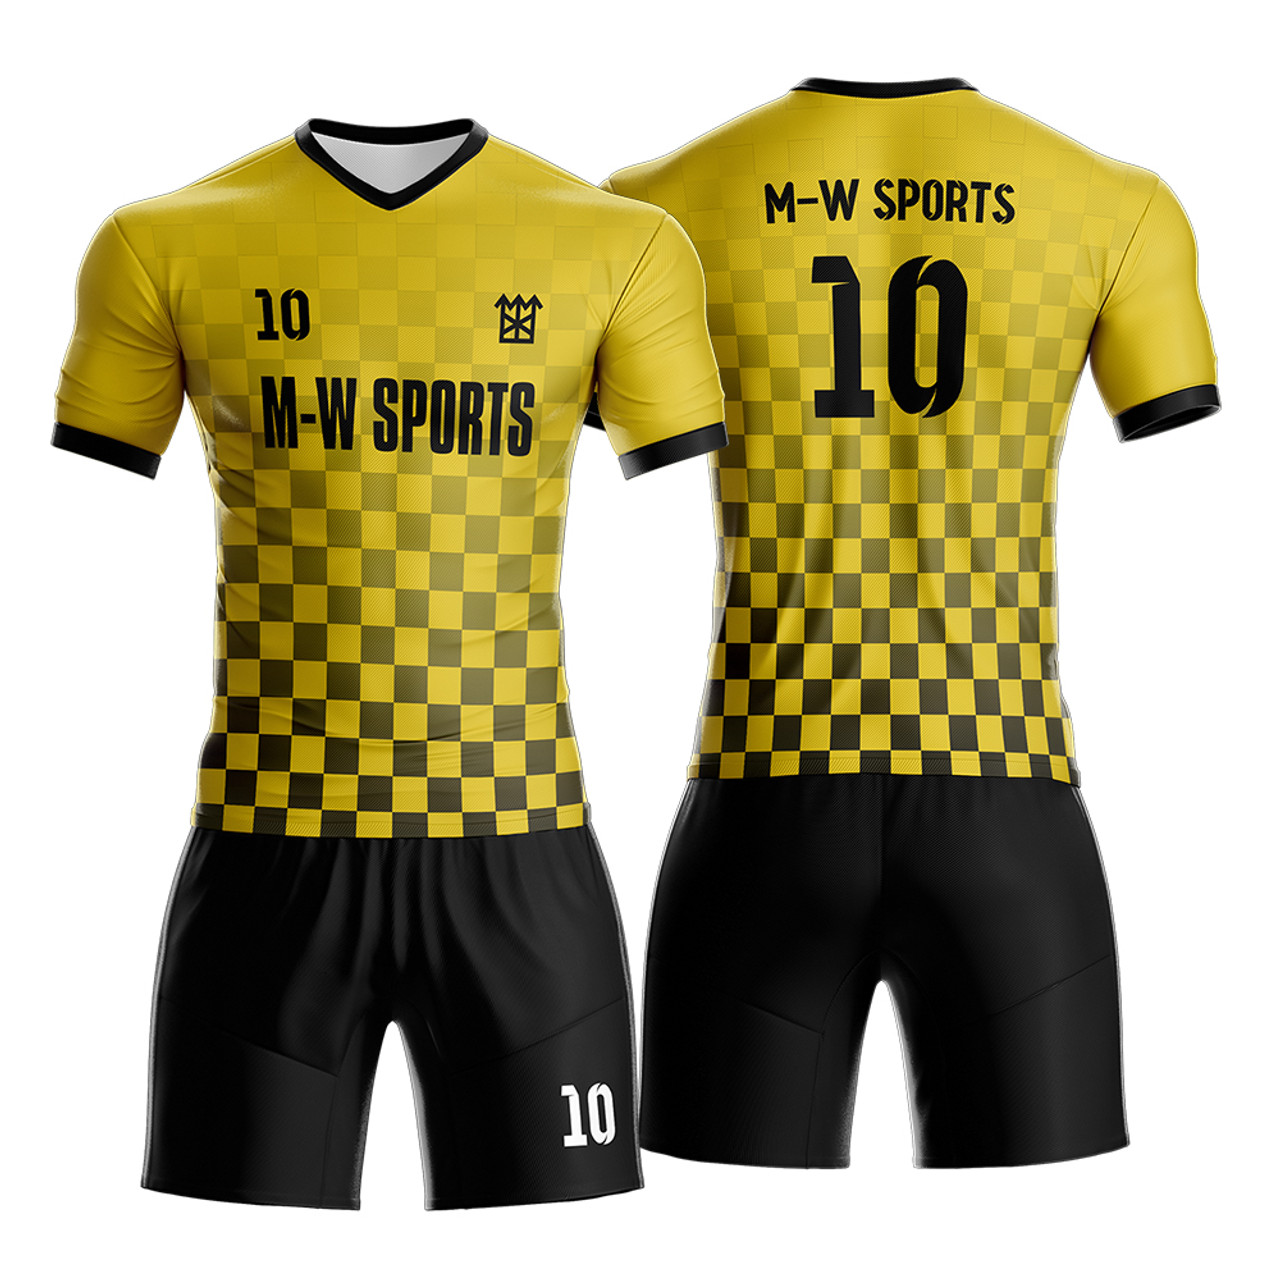 Ordered some jerseys from soccerjerseyteam on Yupoo and the